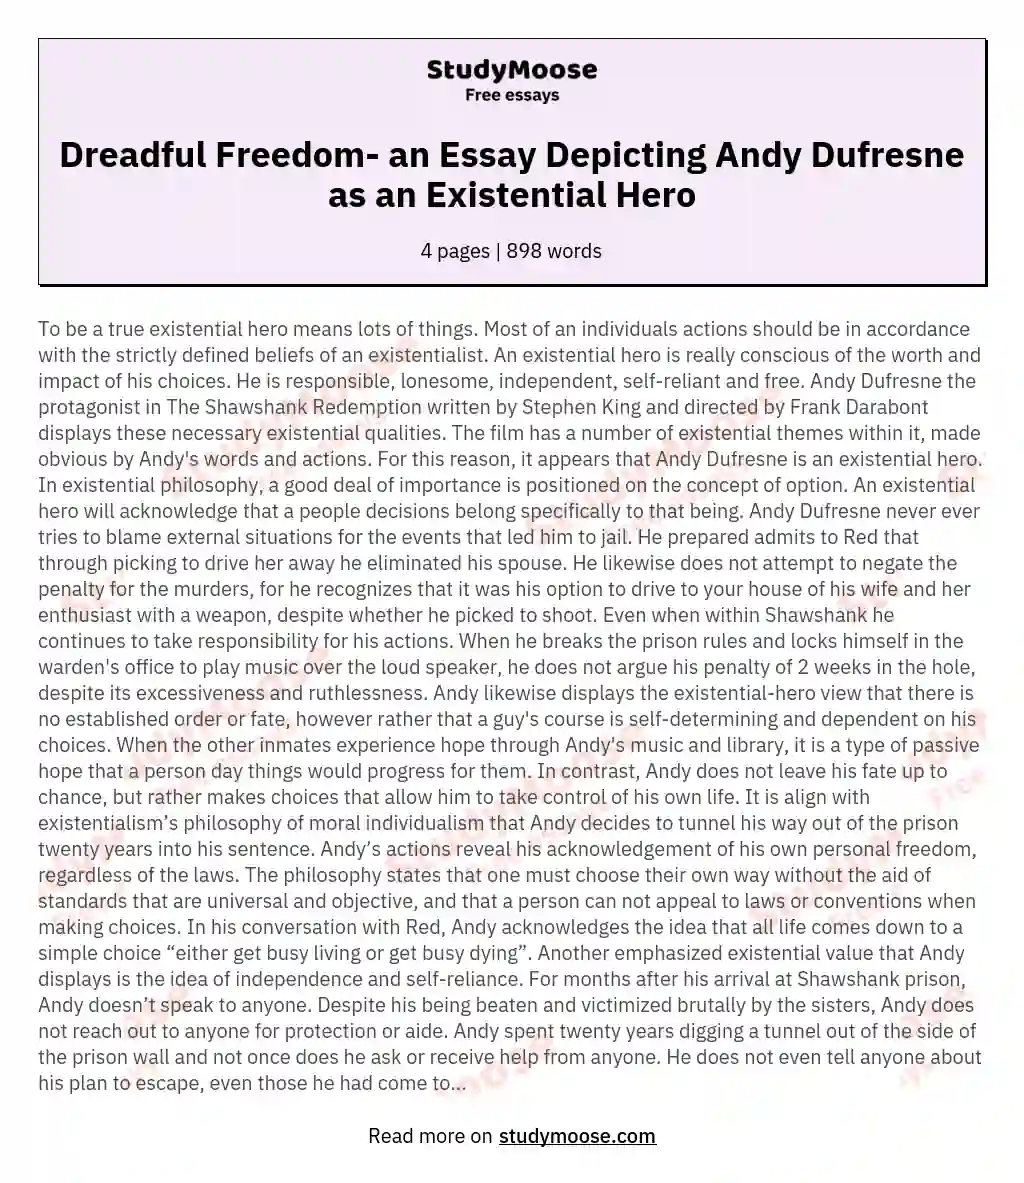 Dreadful Freedom- an Essay Depicting Andy Dufresne as an Existential Hero